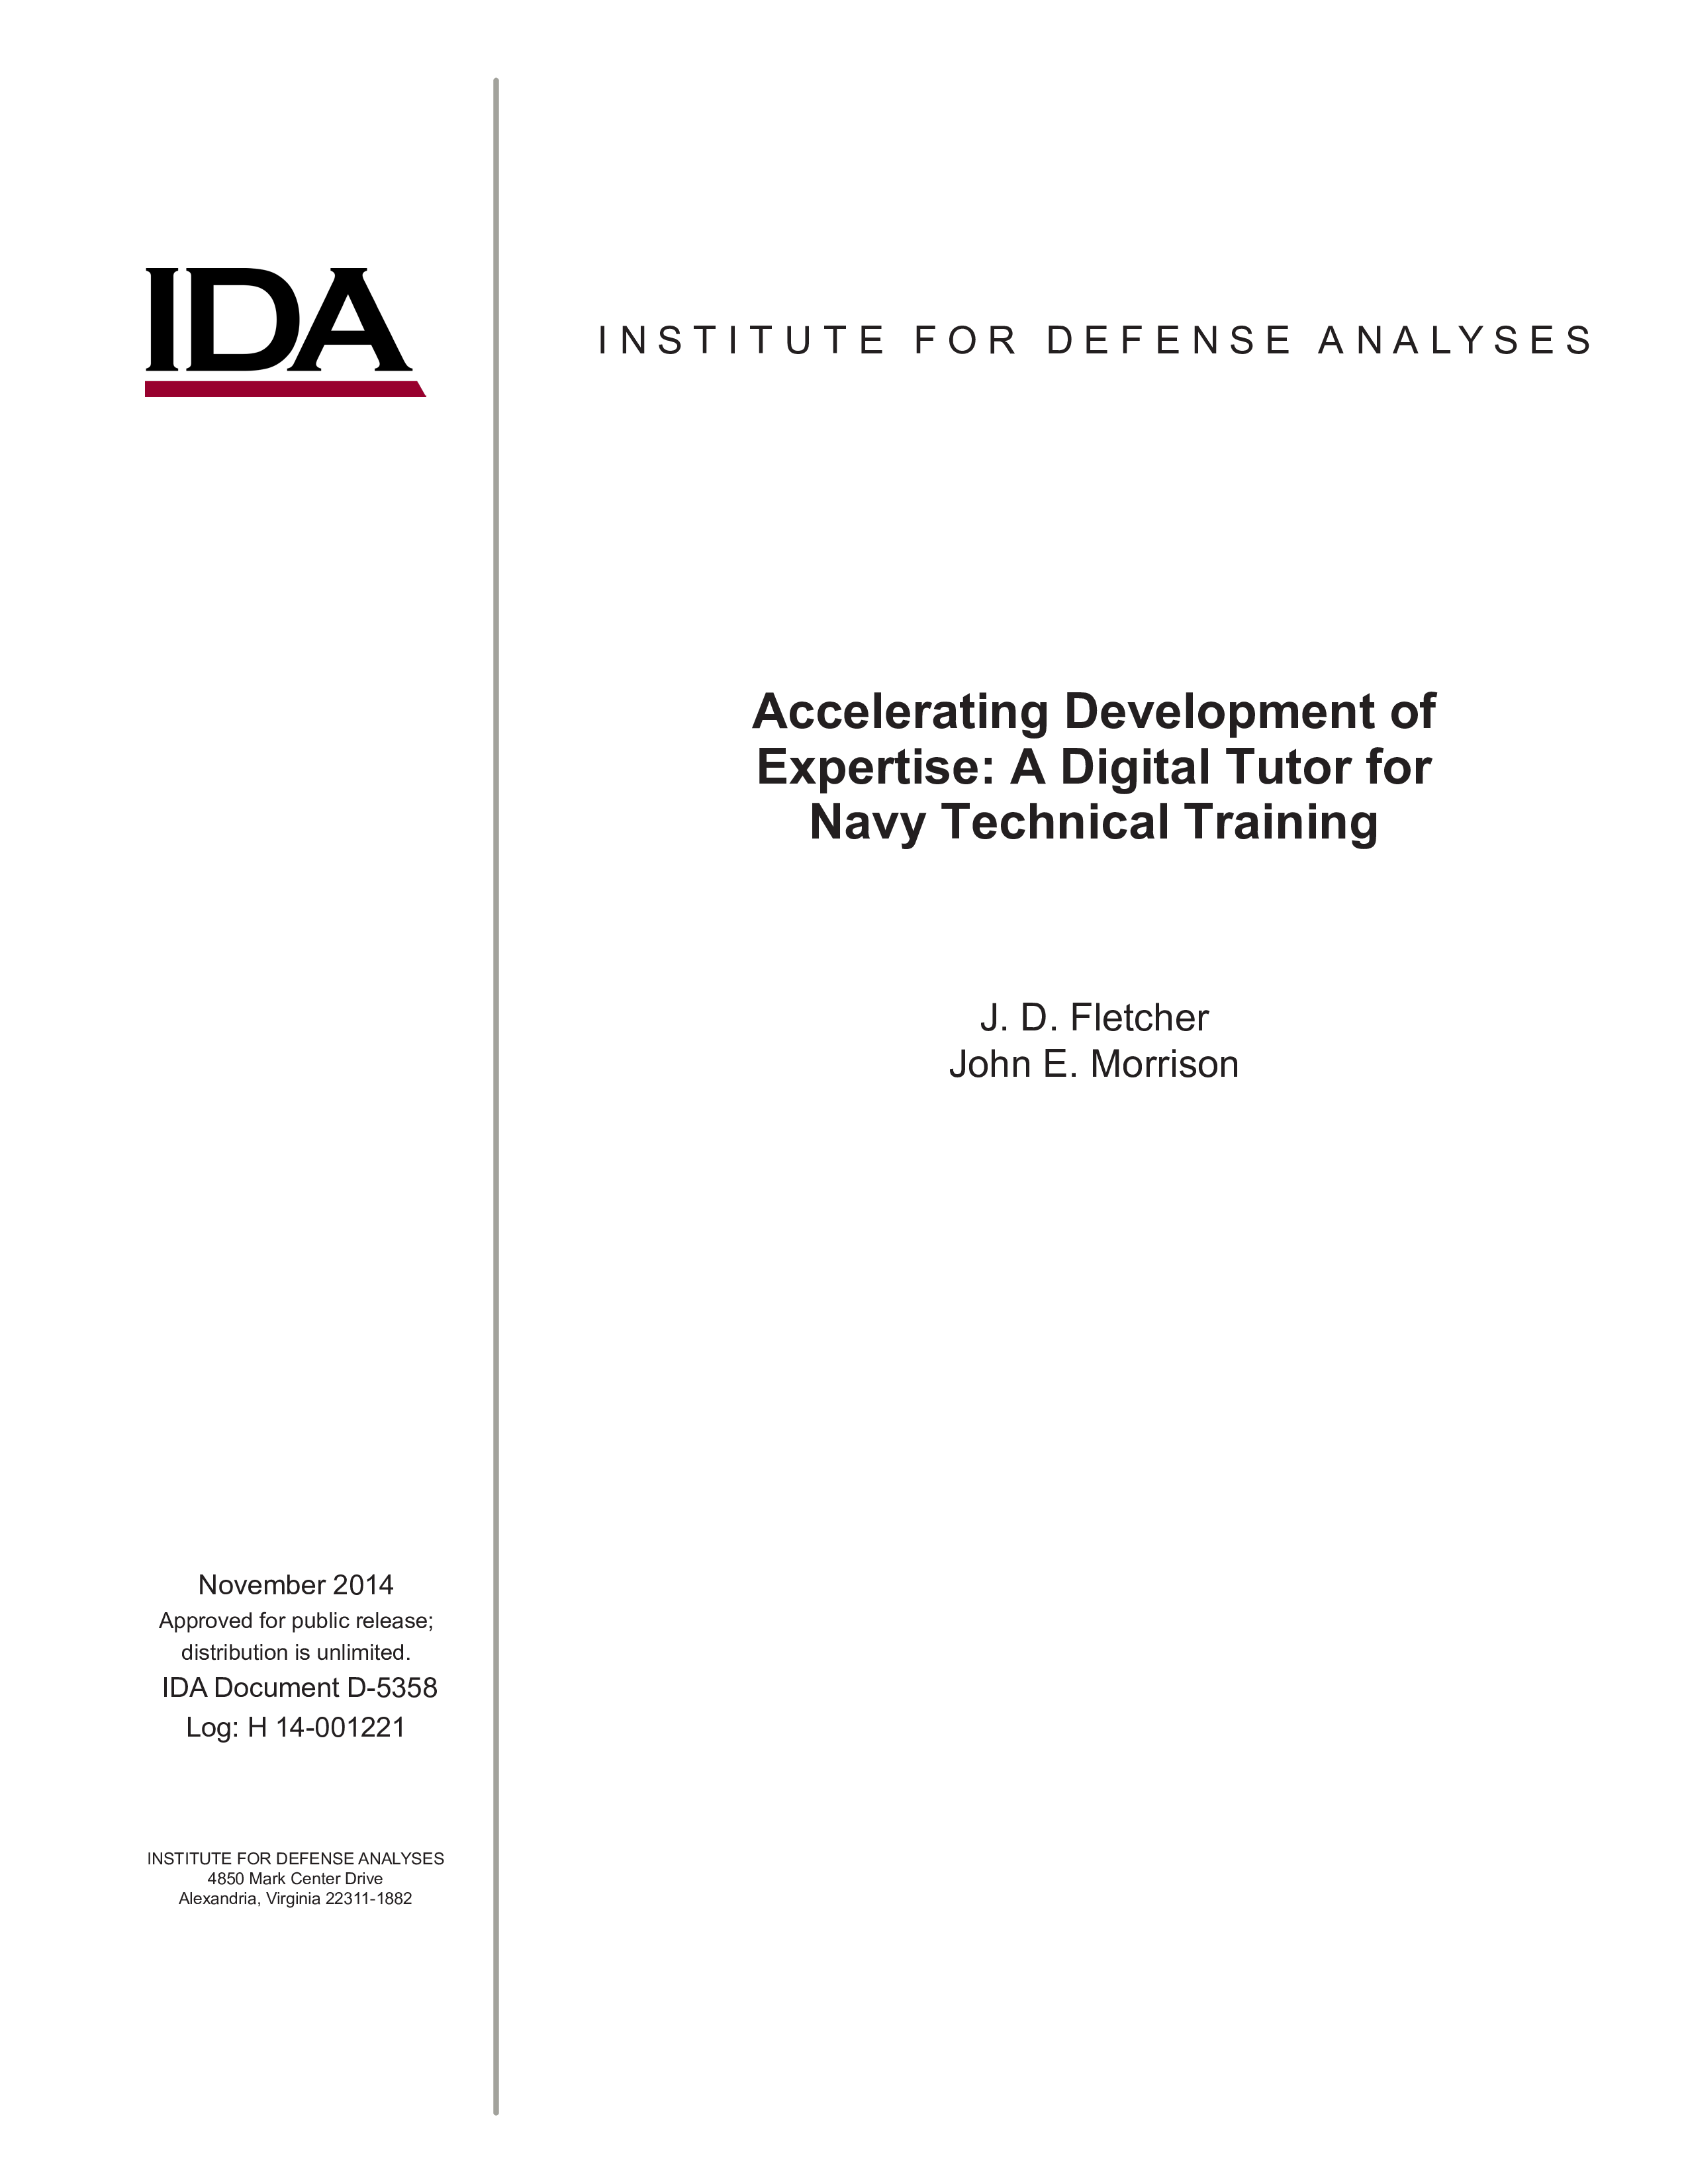 Accelerating Development of Expertise A Digital Tutor for Navy Technical Training